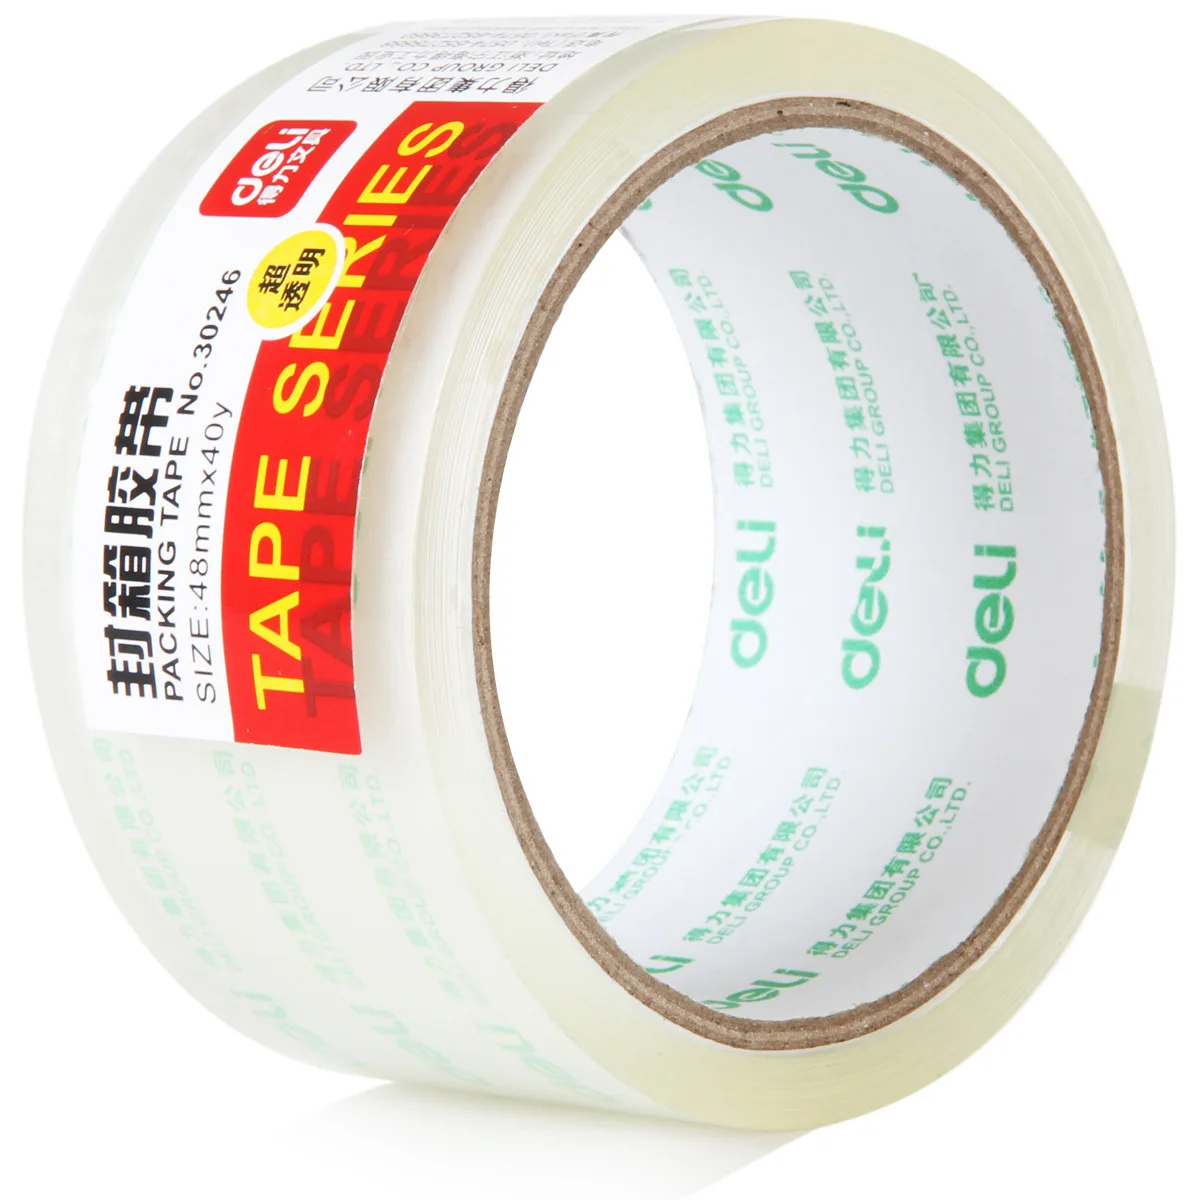 

Tape Supplies Supermarket Transparent Packing Sealing Tape Business Brand Carton Small 48yx40mm 30246 Tape Packing Deli Tape